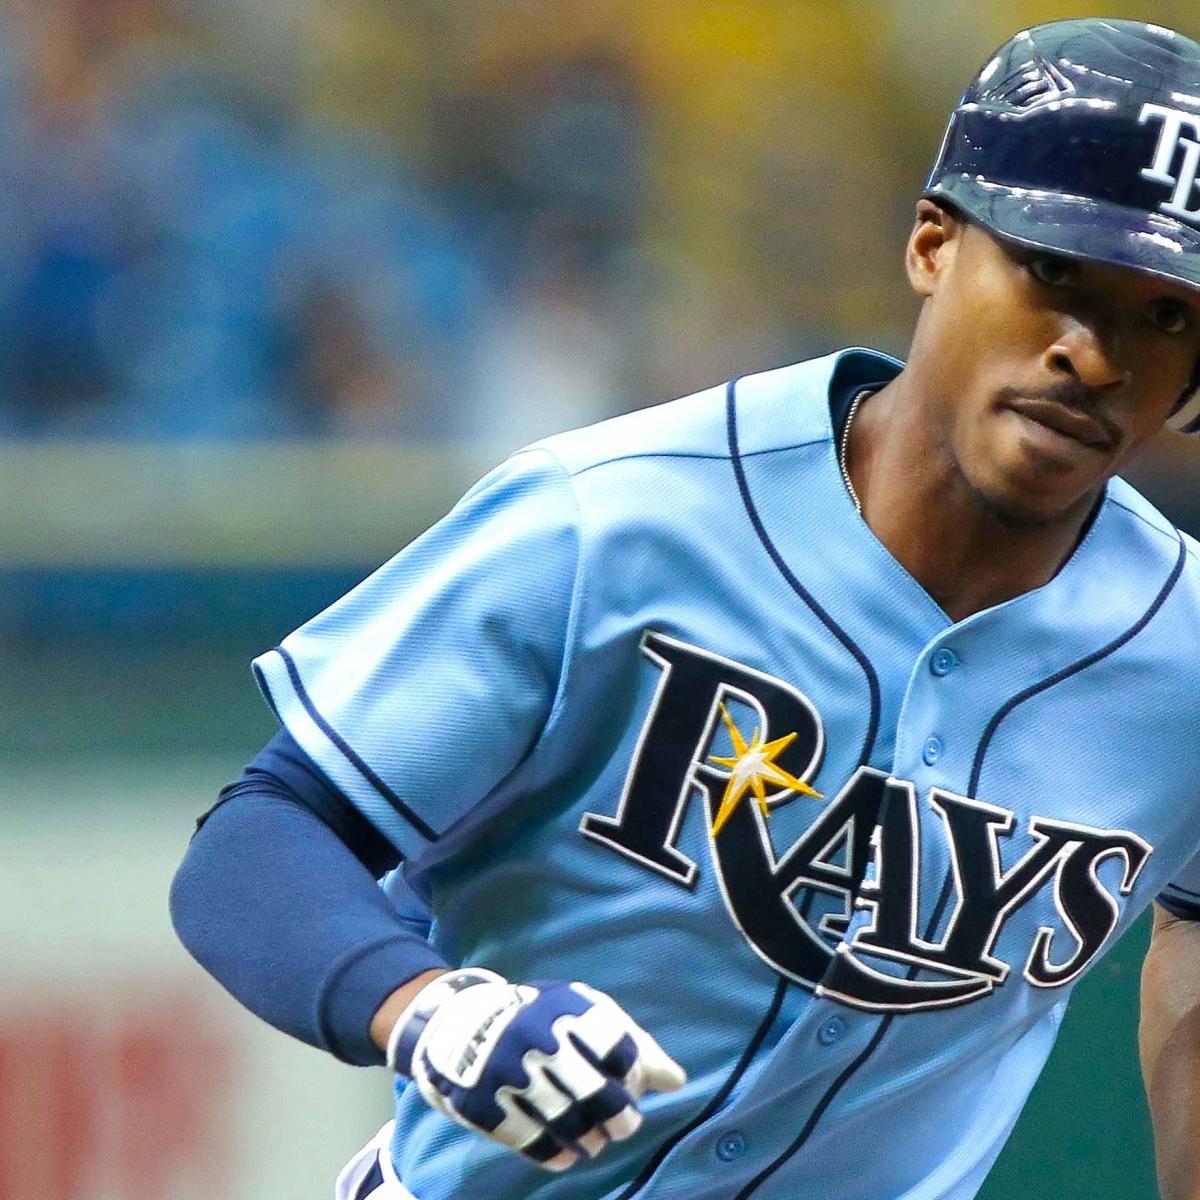 Rays' B.J. Upton agrees to 5-year, $75 million deal with Atlanta